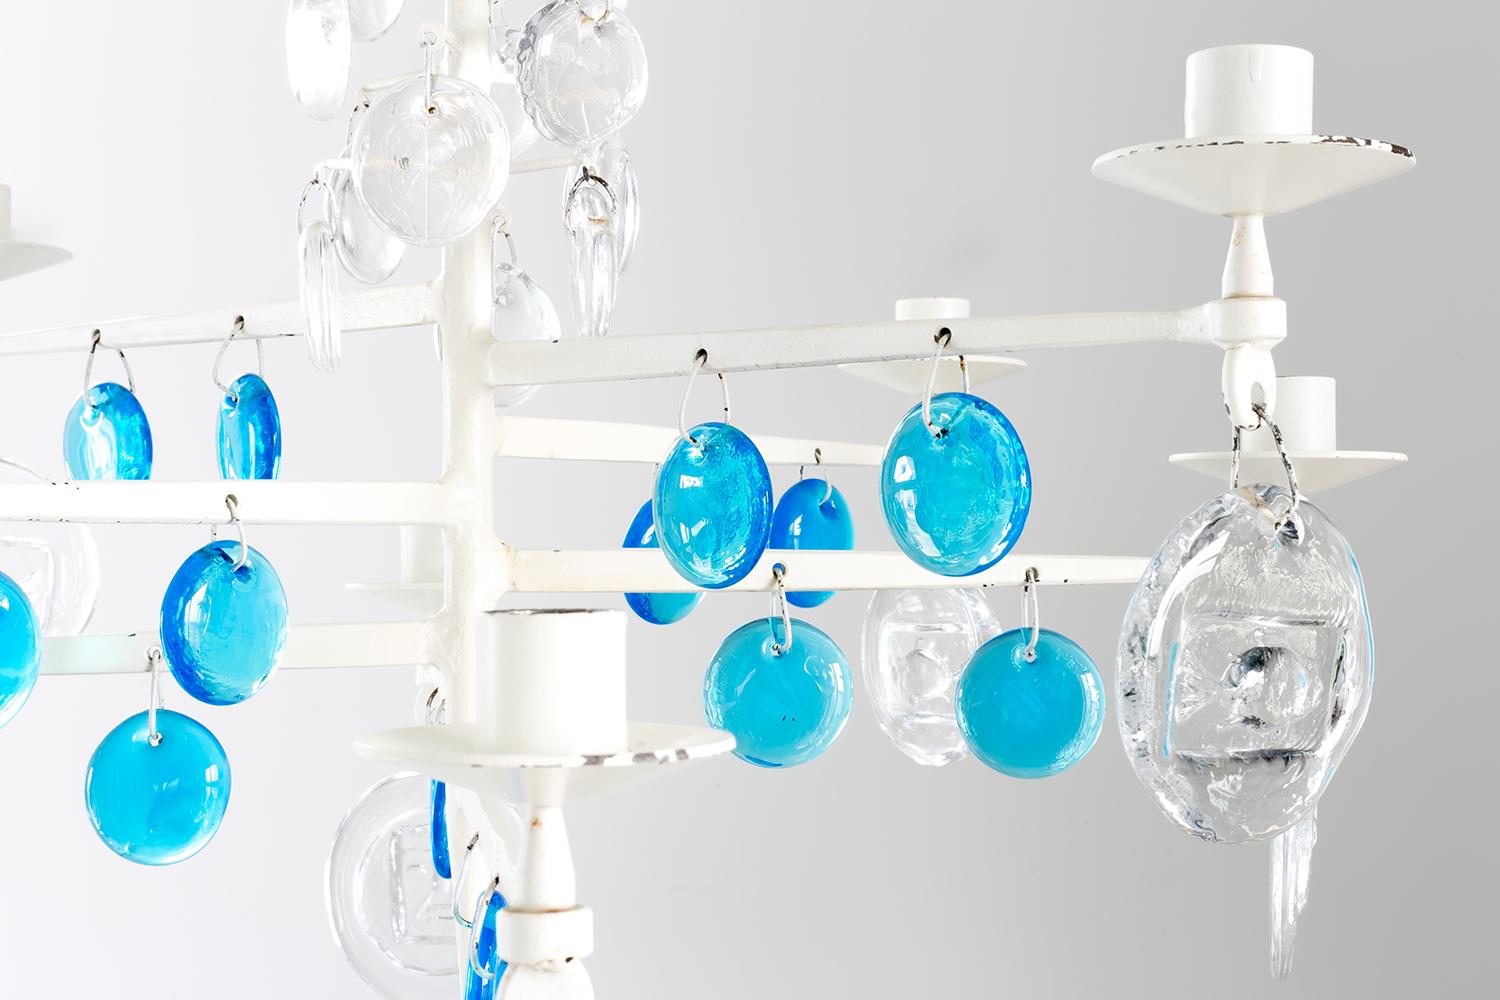 Chandelier with an iron frame made using the wrought iron technique of forming by hammerwork, hand-blown glass and glass ornaments.

This one has a rare frame painted white and turquoise ornaments, manufactured in the late 1960s. Four iron hooks are